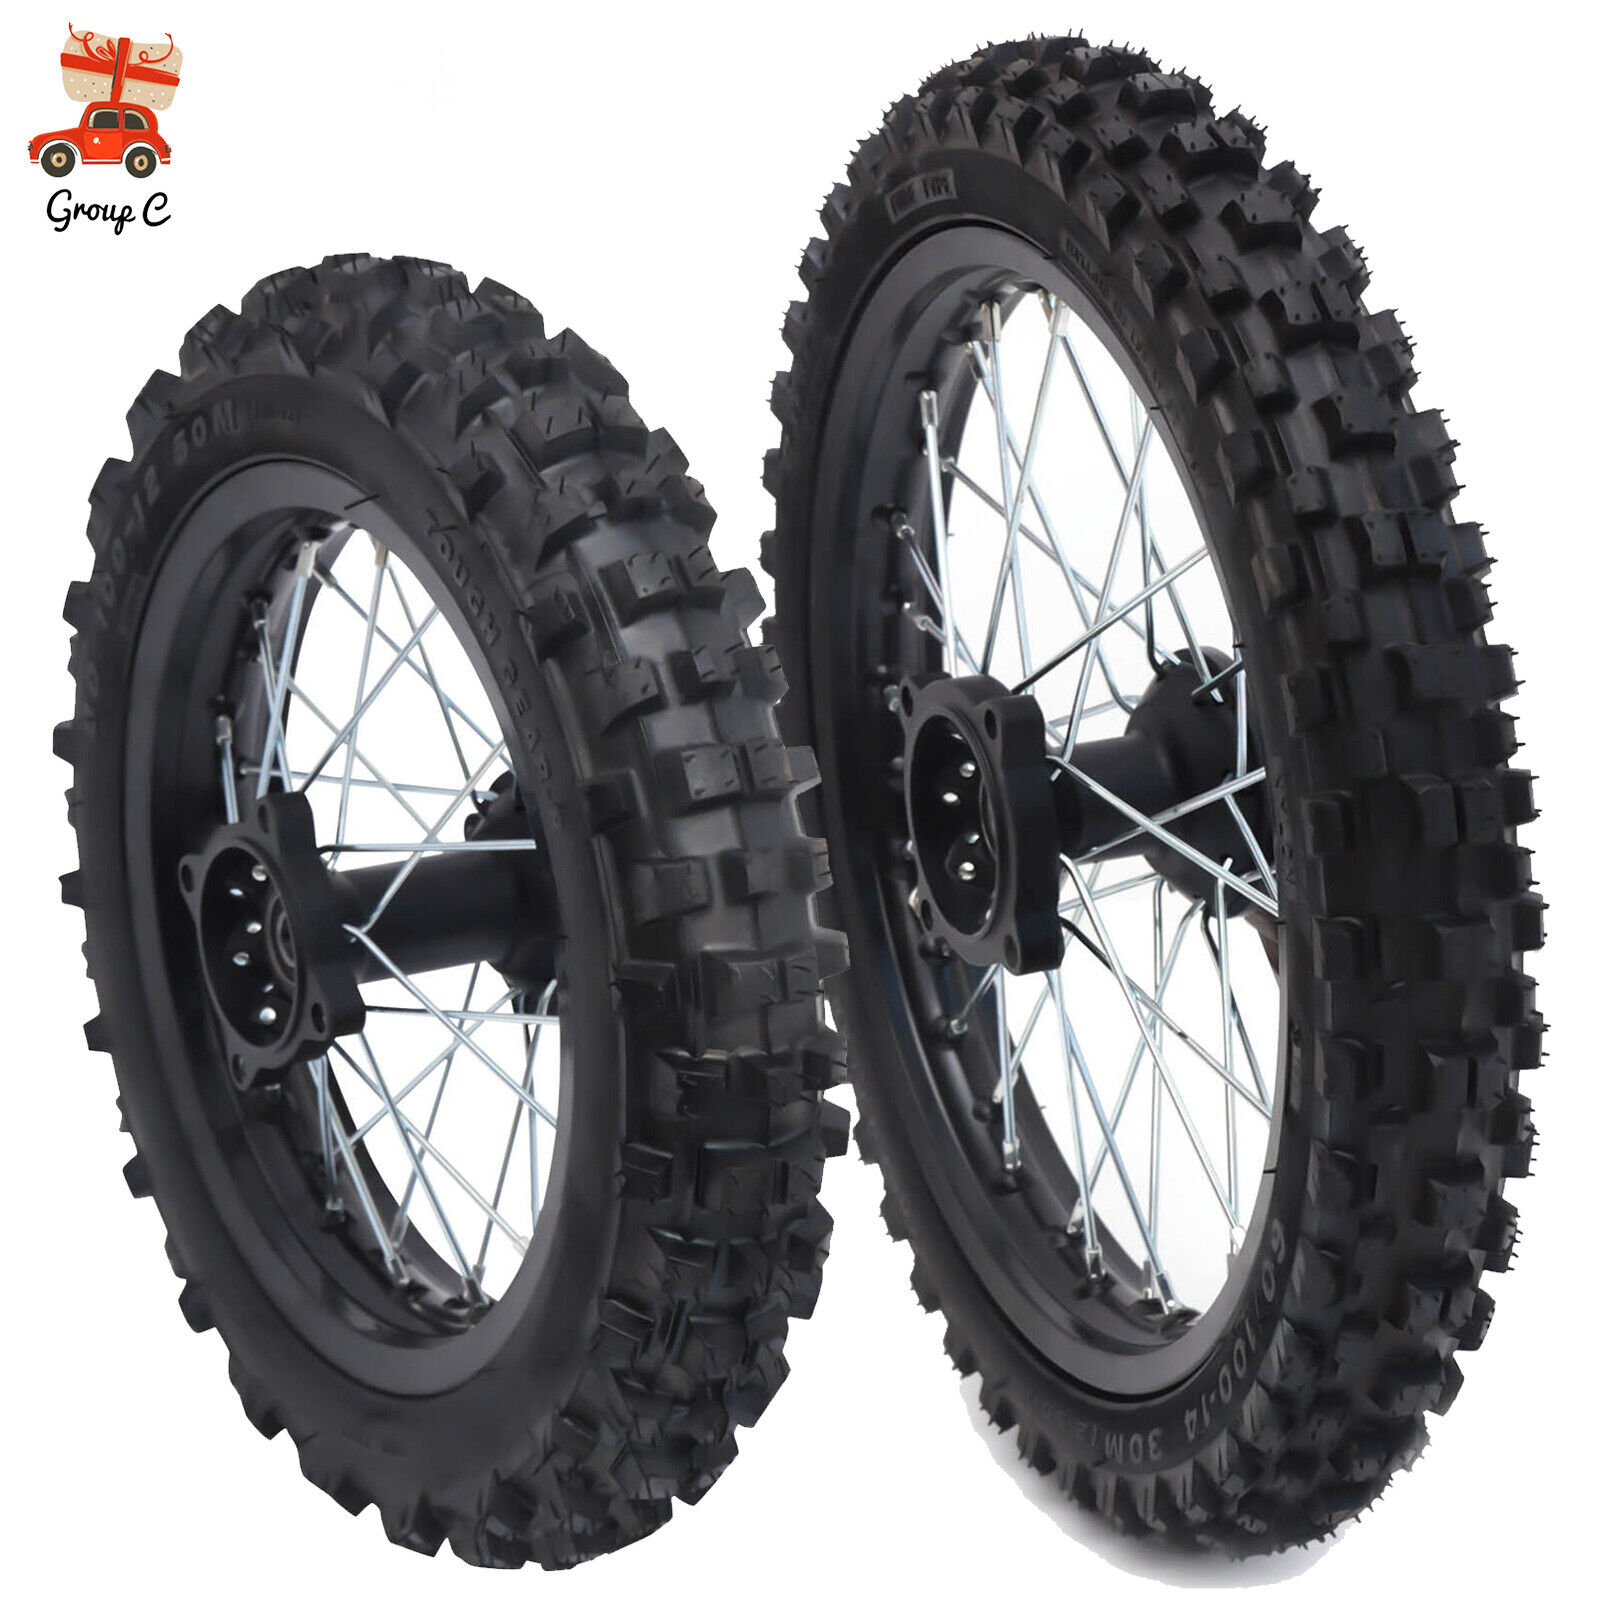 For Dirt Pit Bike 14 inch/12 inch Wheels Front 60/100-14 Rear 80/100-12 Tire Rim